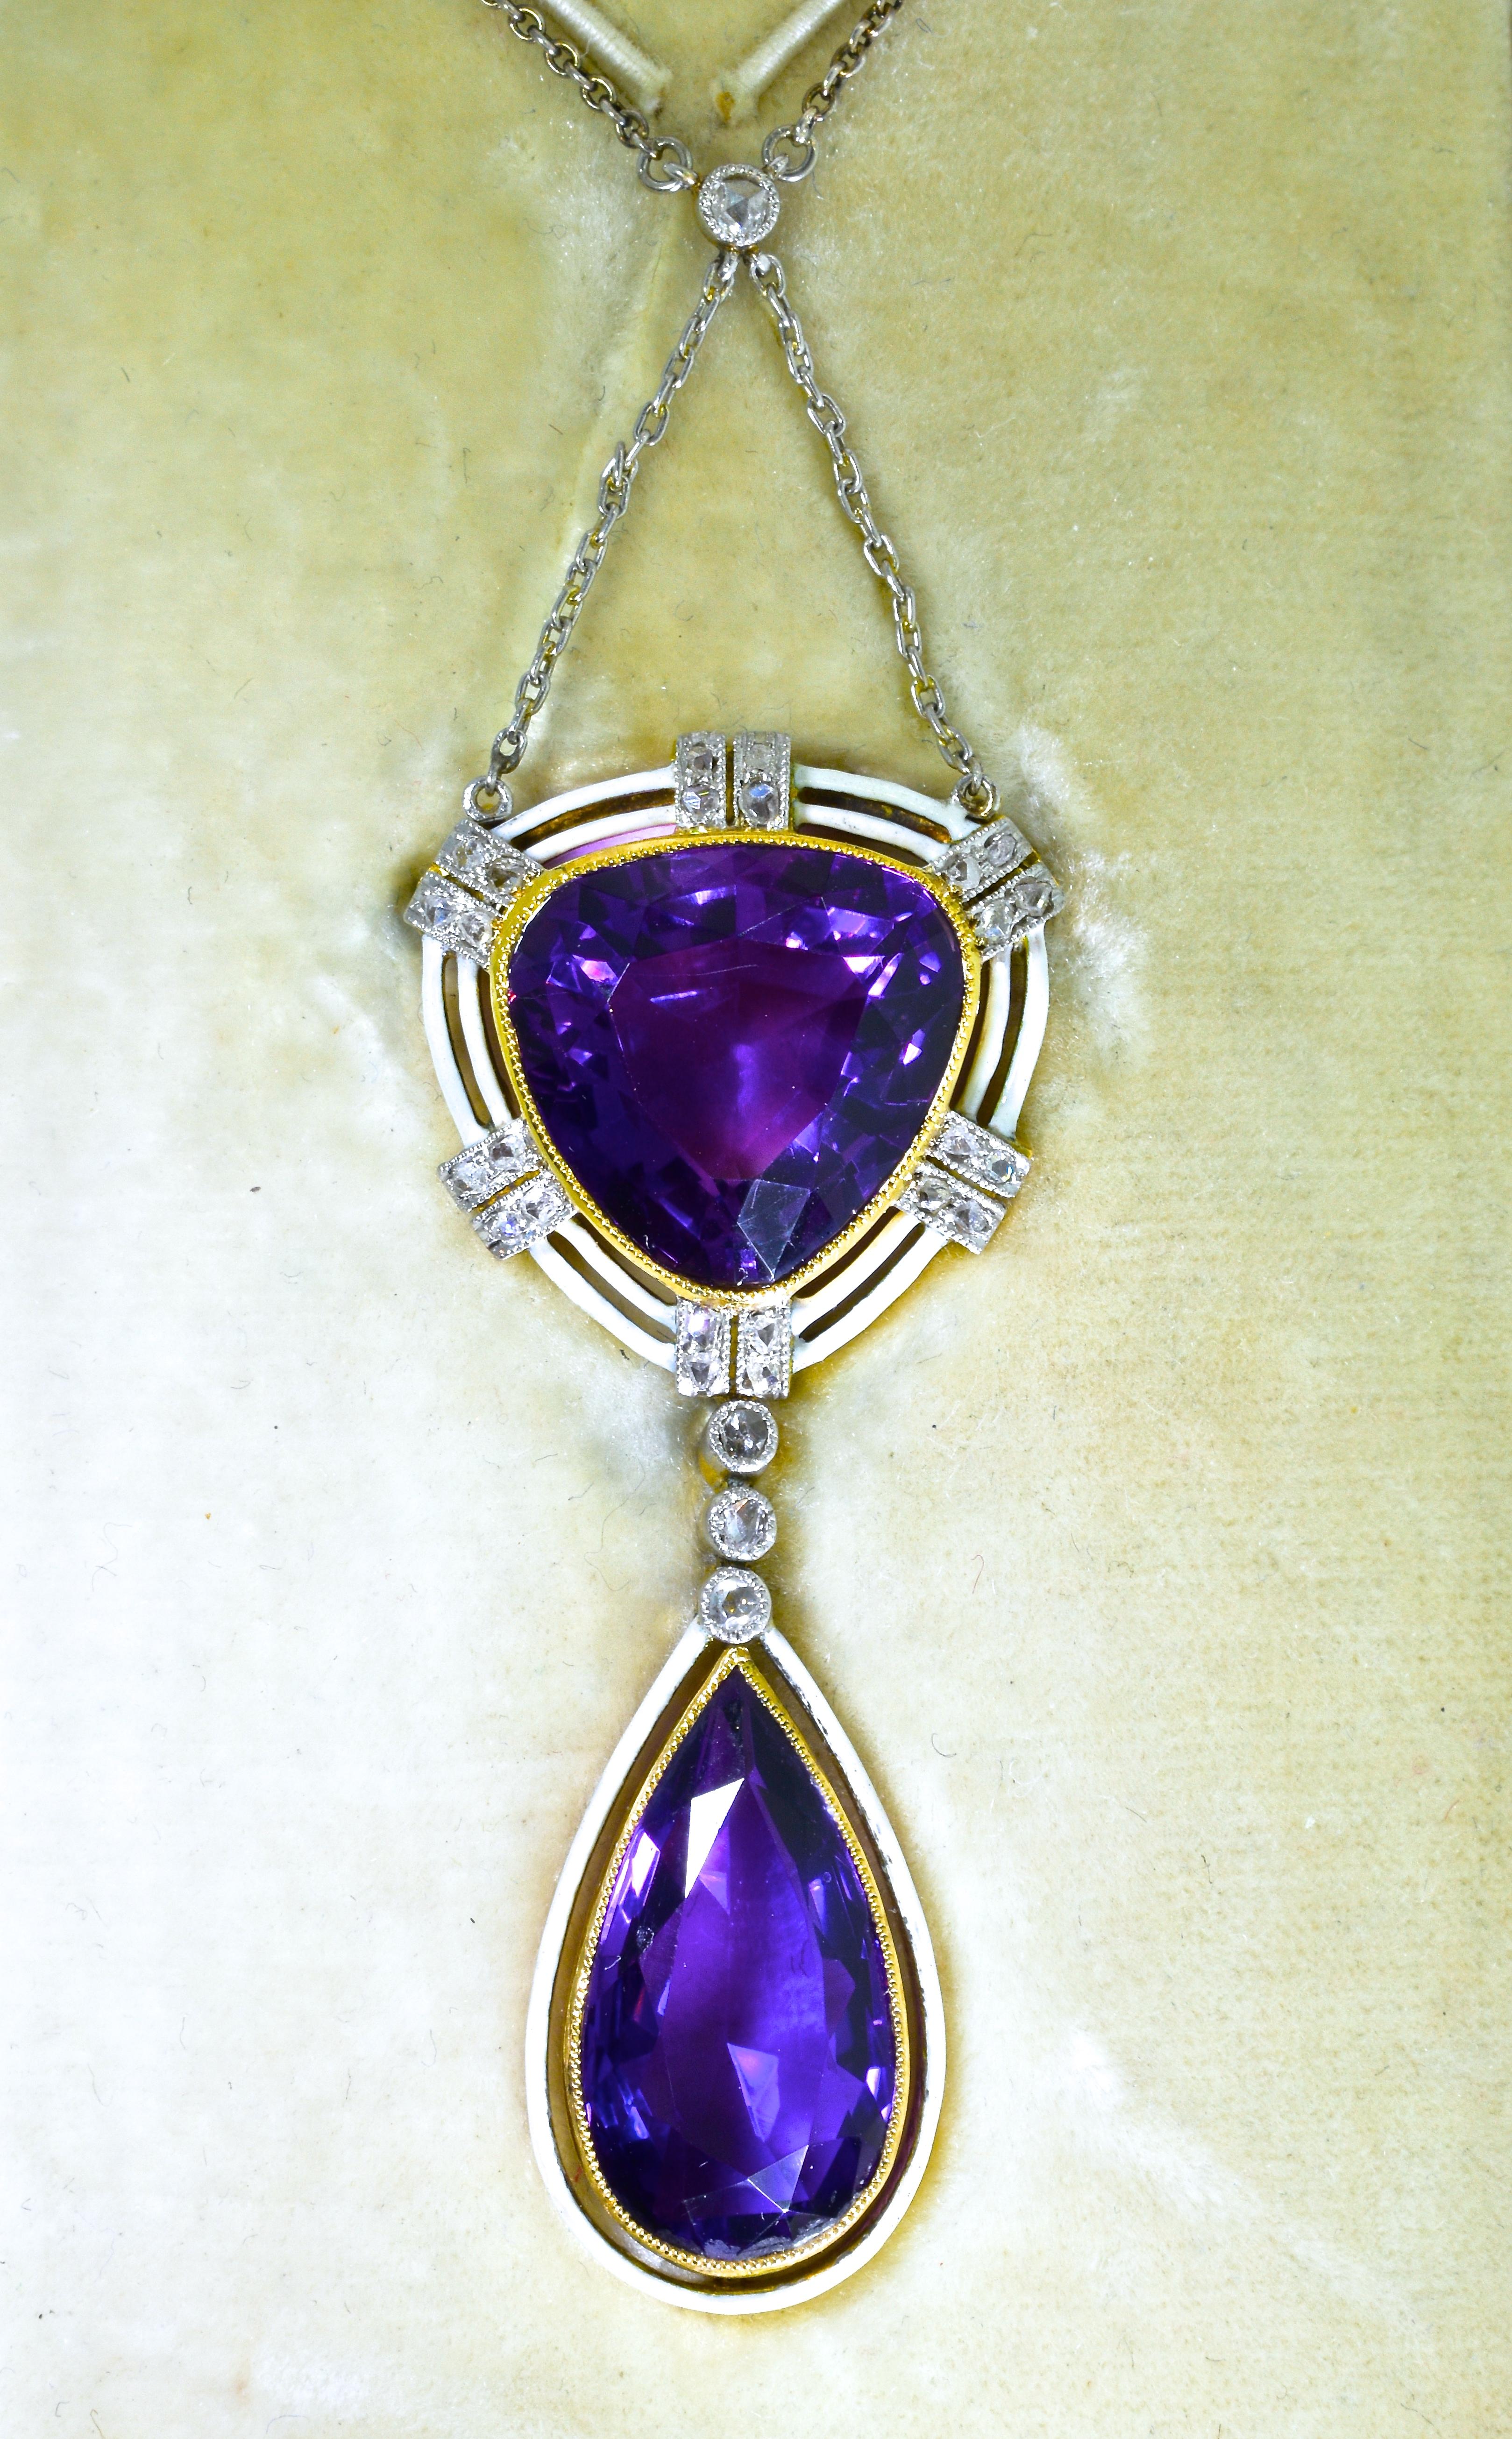 Antique Belle Epoque 18K gold, white enamel and very fine deep natural amethyst pendant suspended from a platinum chain.  The pendant  is 2 inches long and the chain can be worn either at a long 20 inches or use the shortener and wear it at 16.5